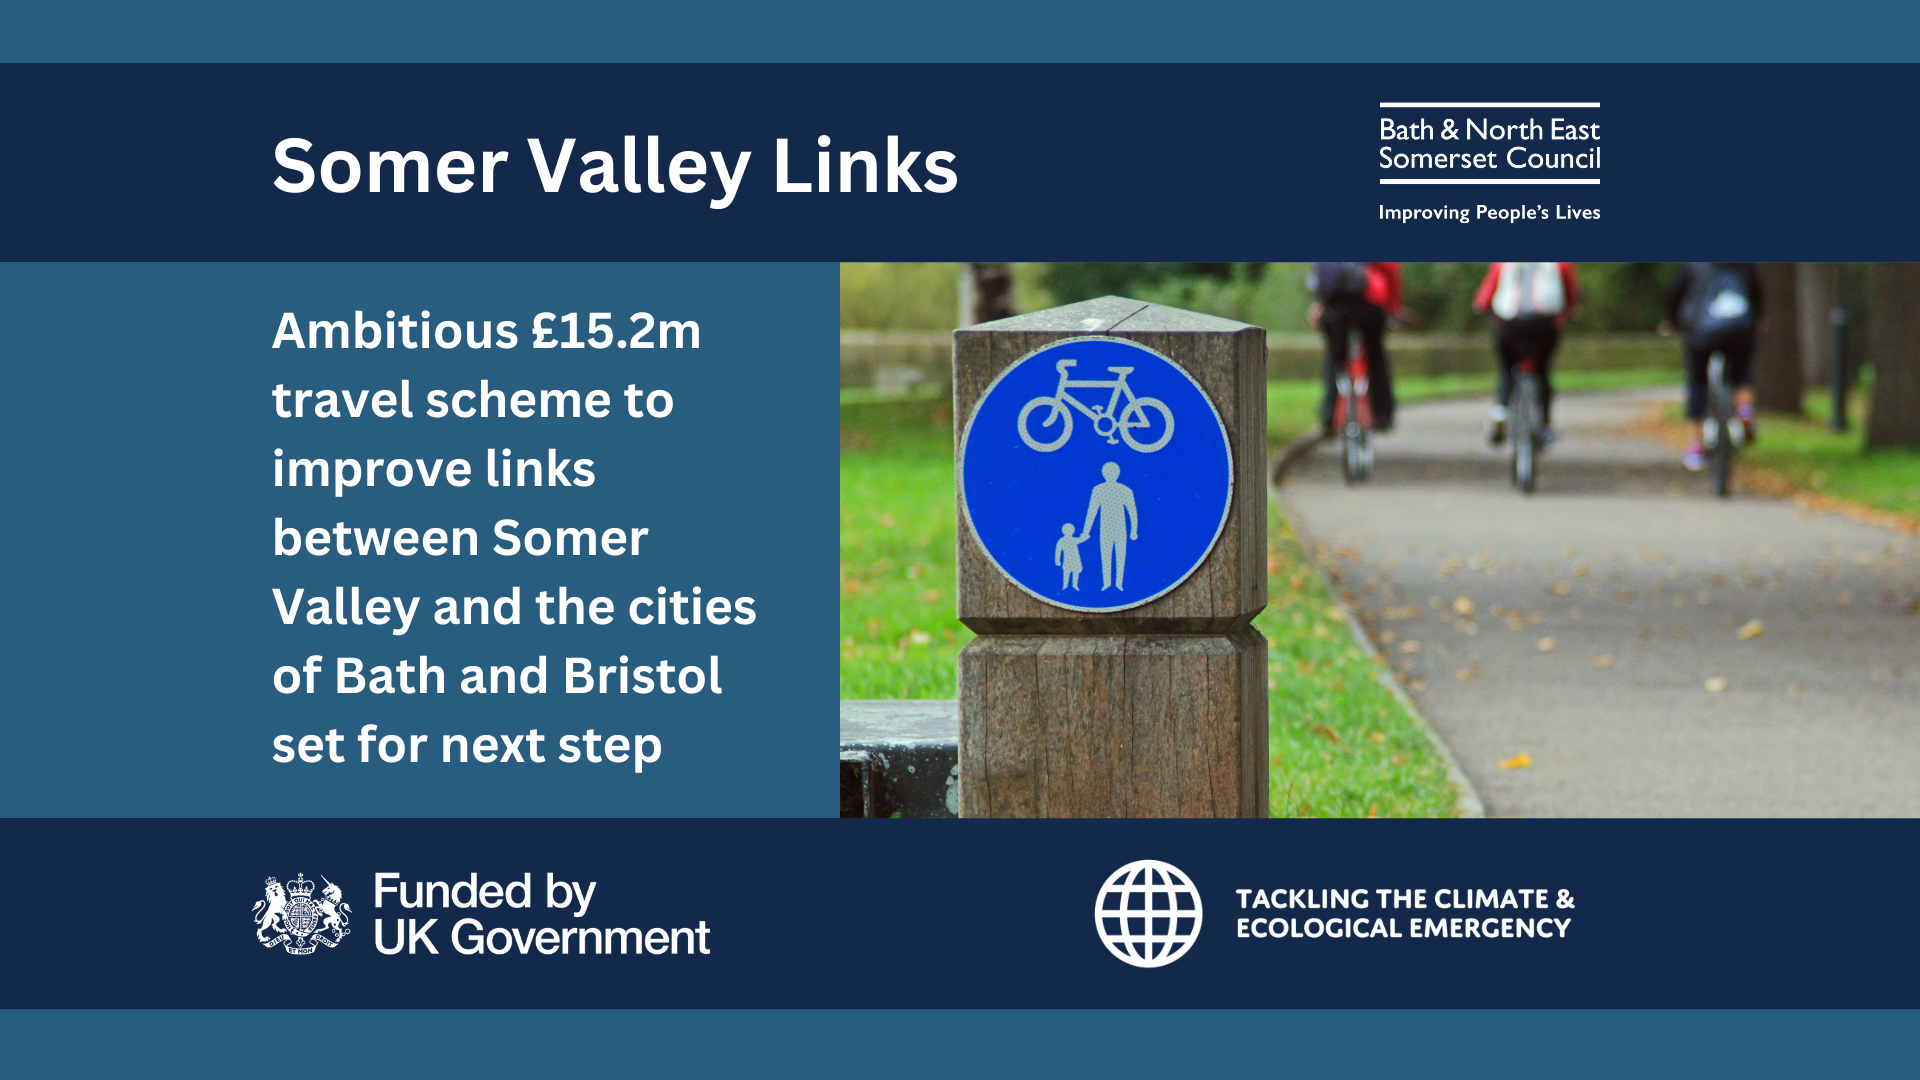 Cycling and walking path with text Ambitious £15.2m travel scheme to improve links between Somer Valley and the cities of Bath and Bristol set for next step.